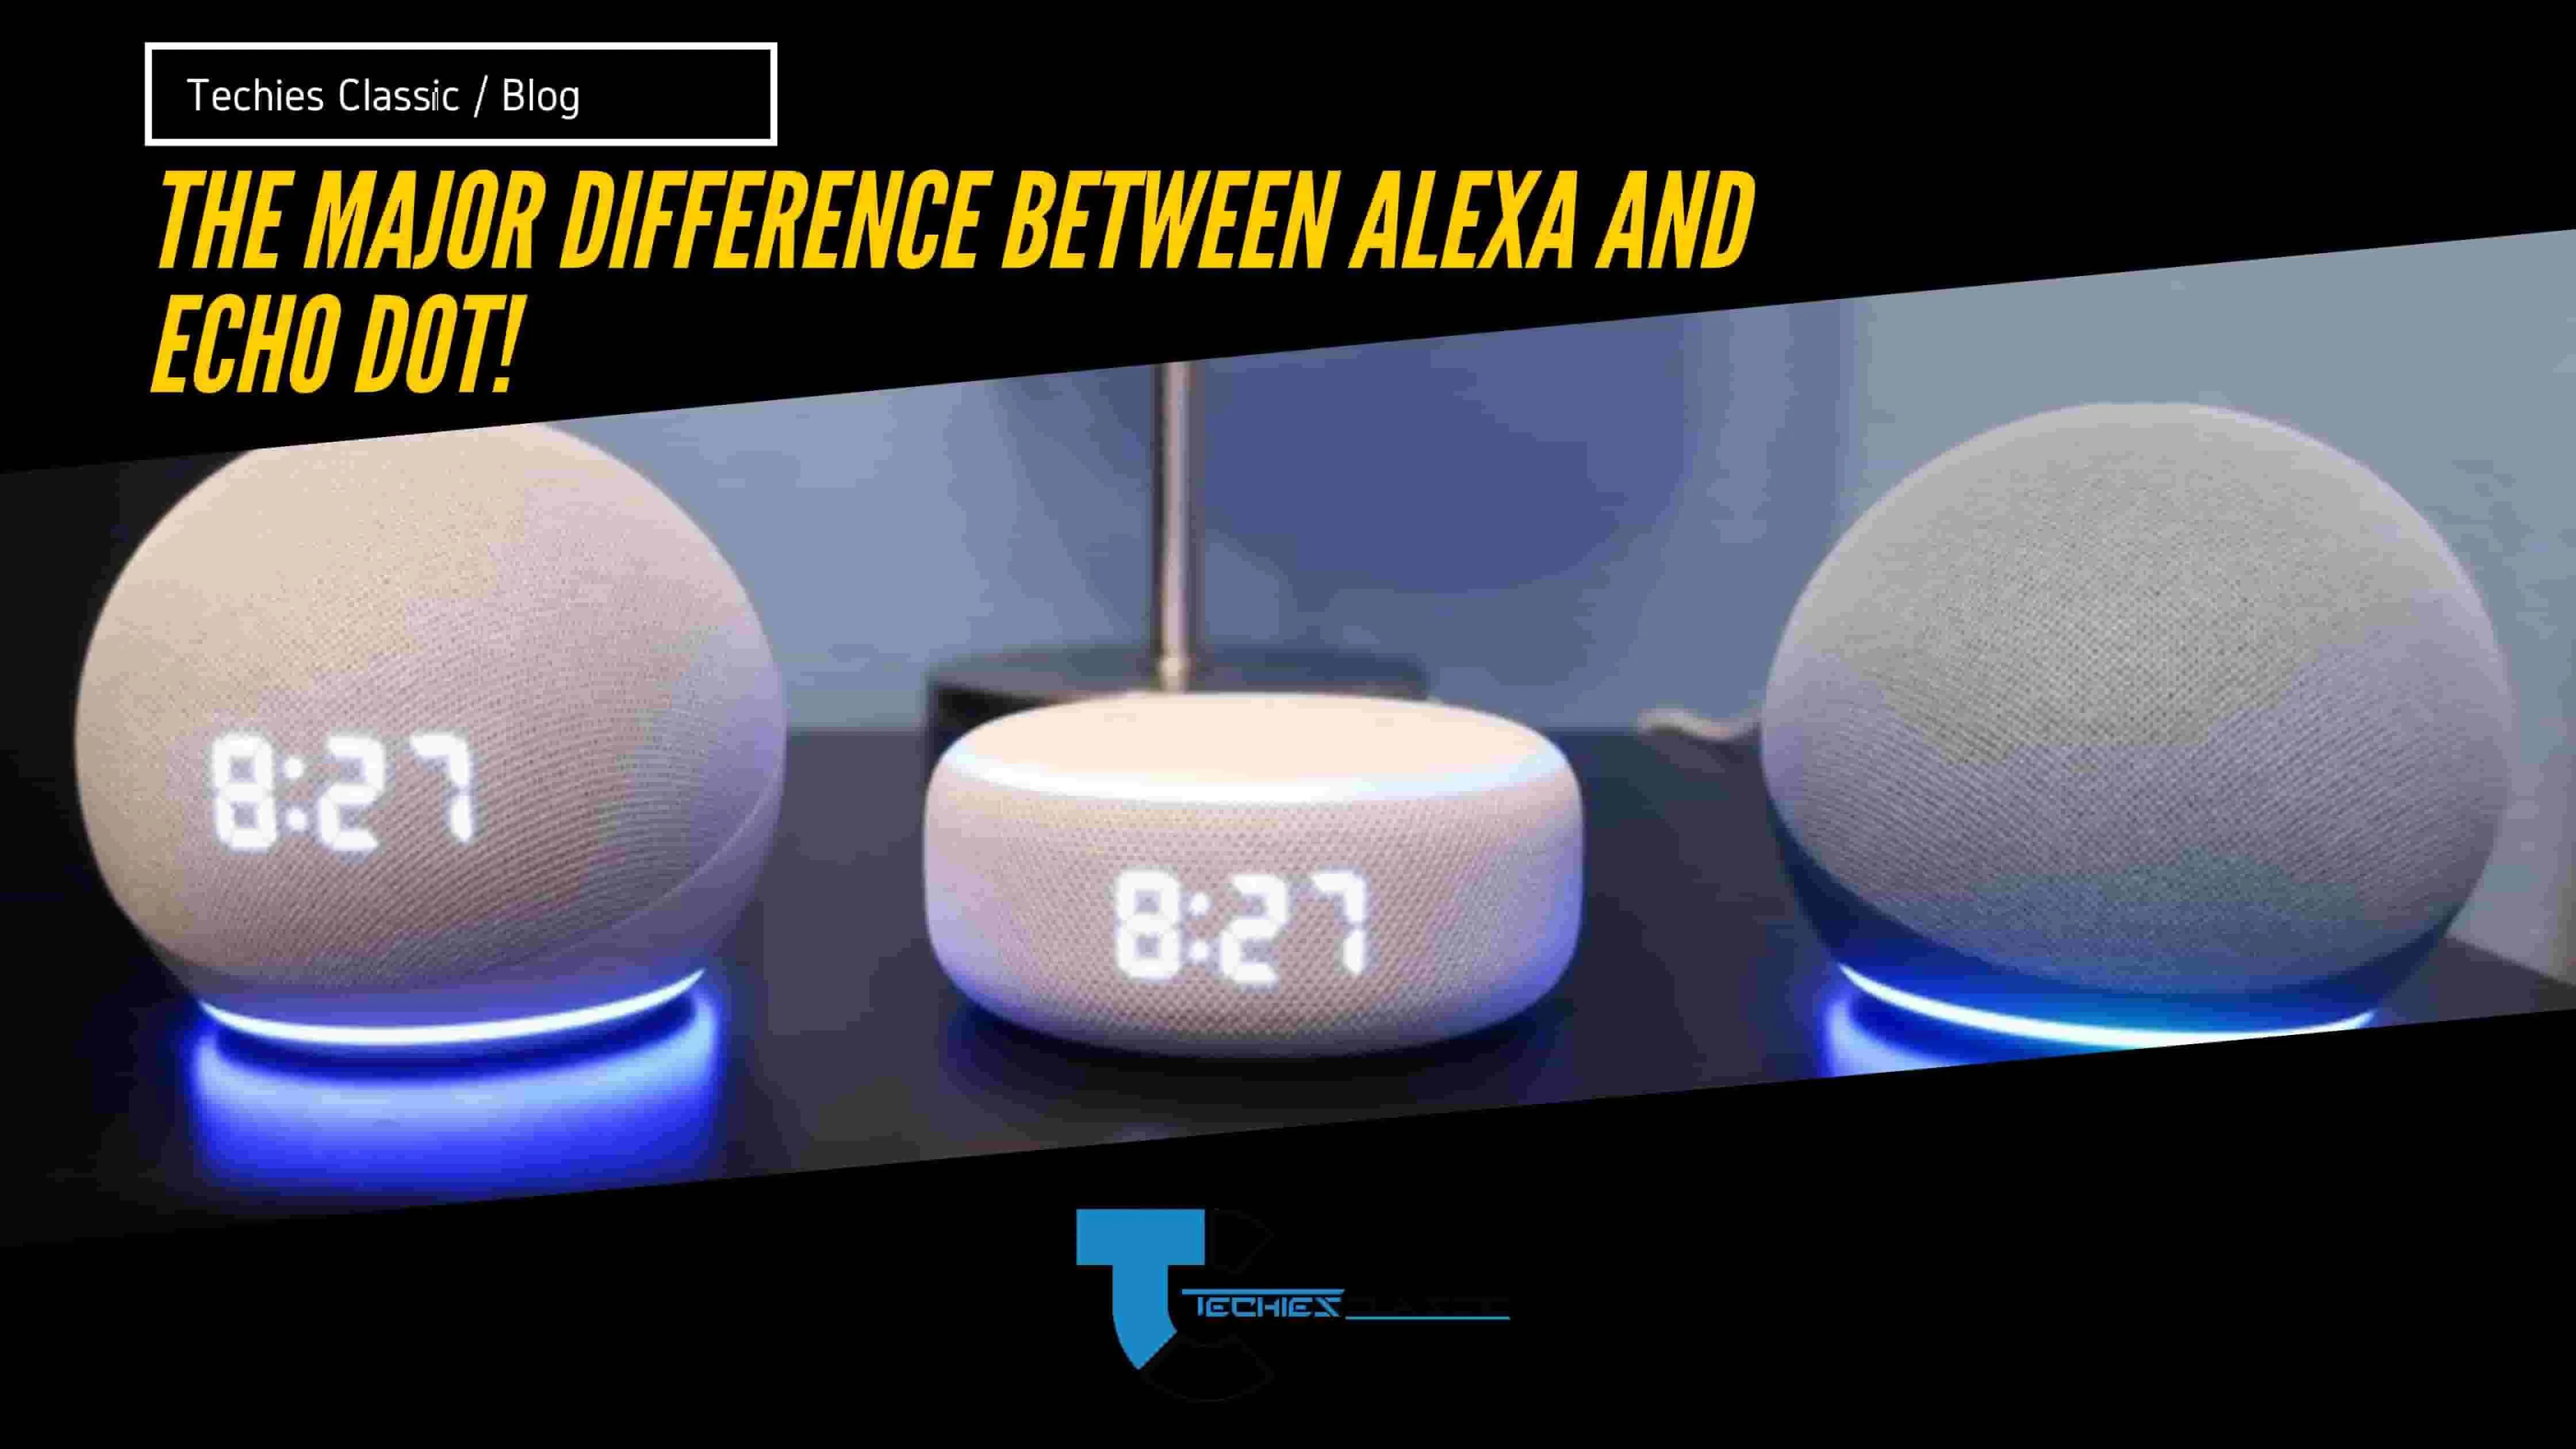 The Major difference between Alexa and Echo Dot!